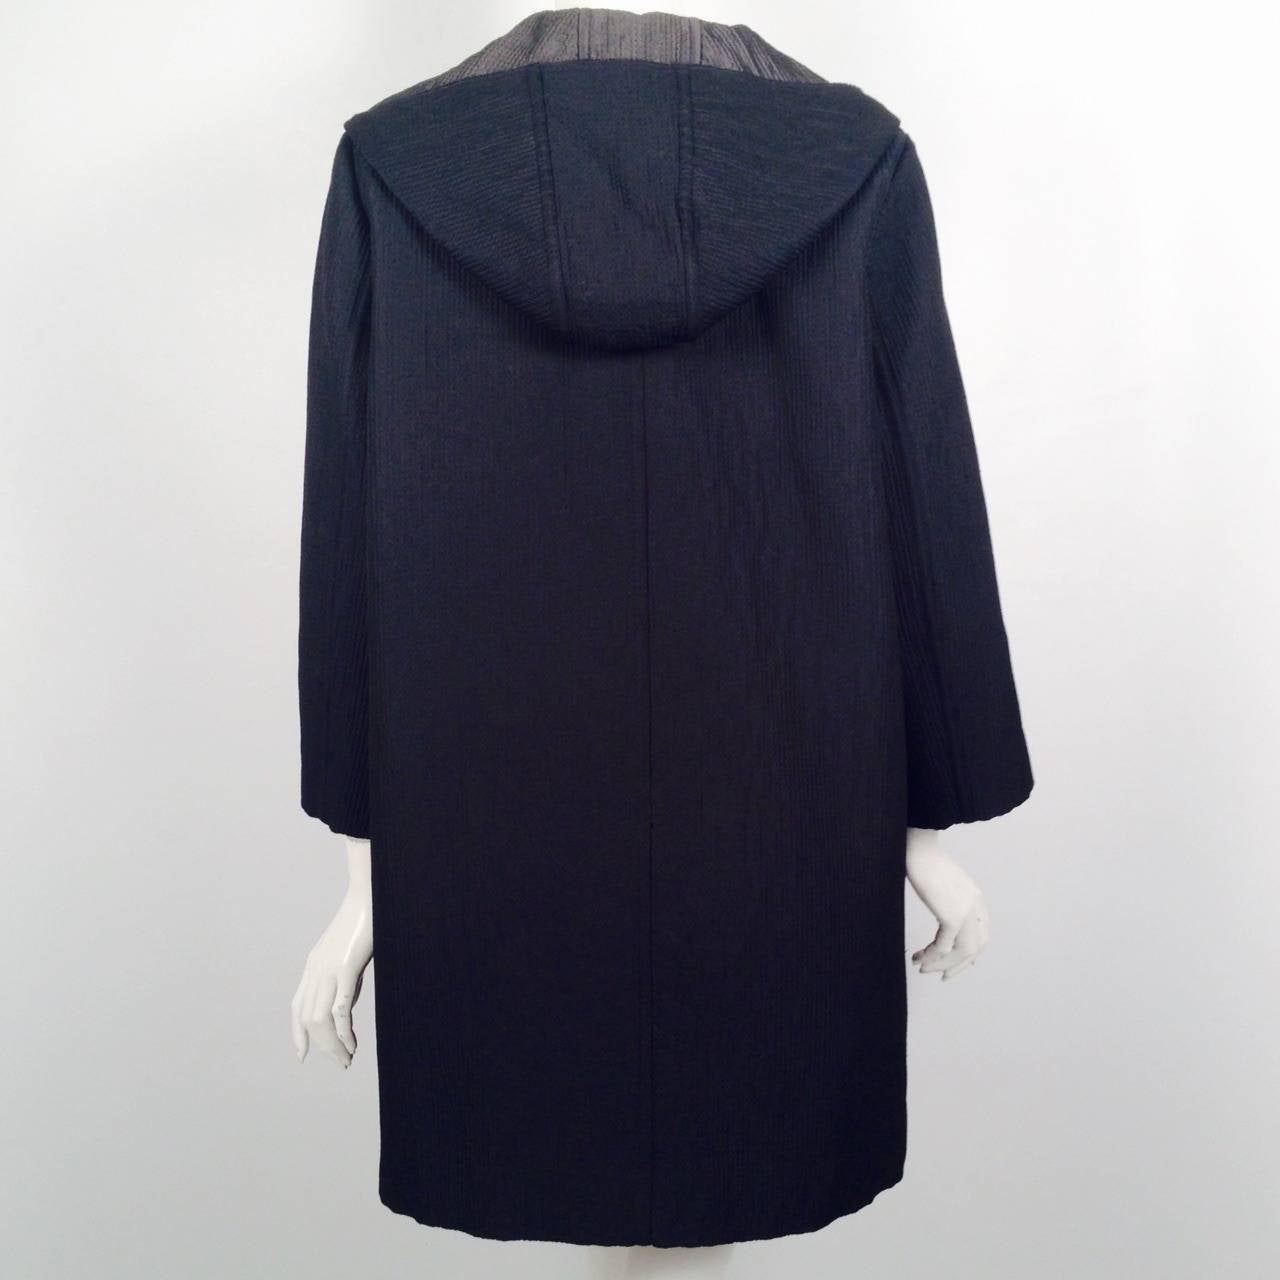 Vera Wang Hooded Coat With Paillette Patch Pockets In Excellent Condition For Sale In Palm Beach, FL